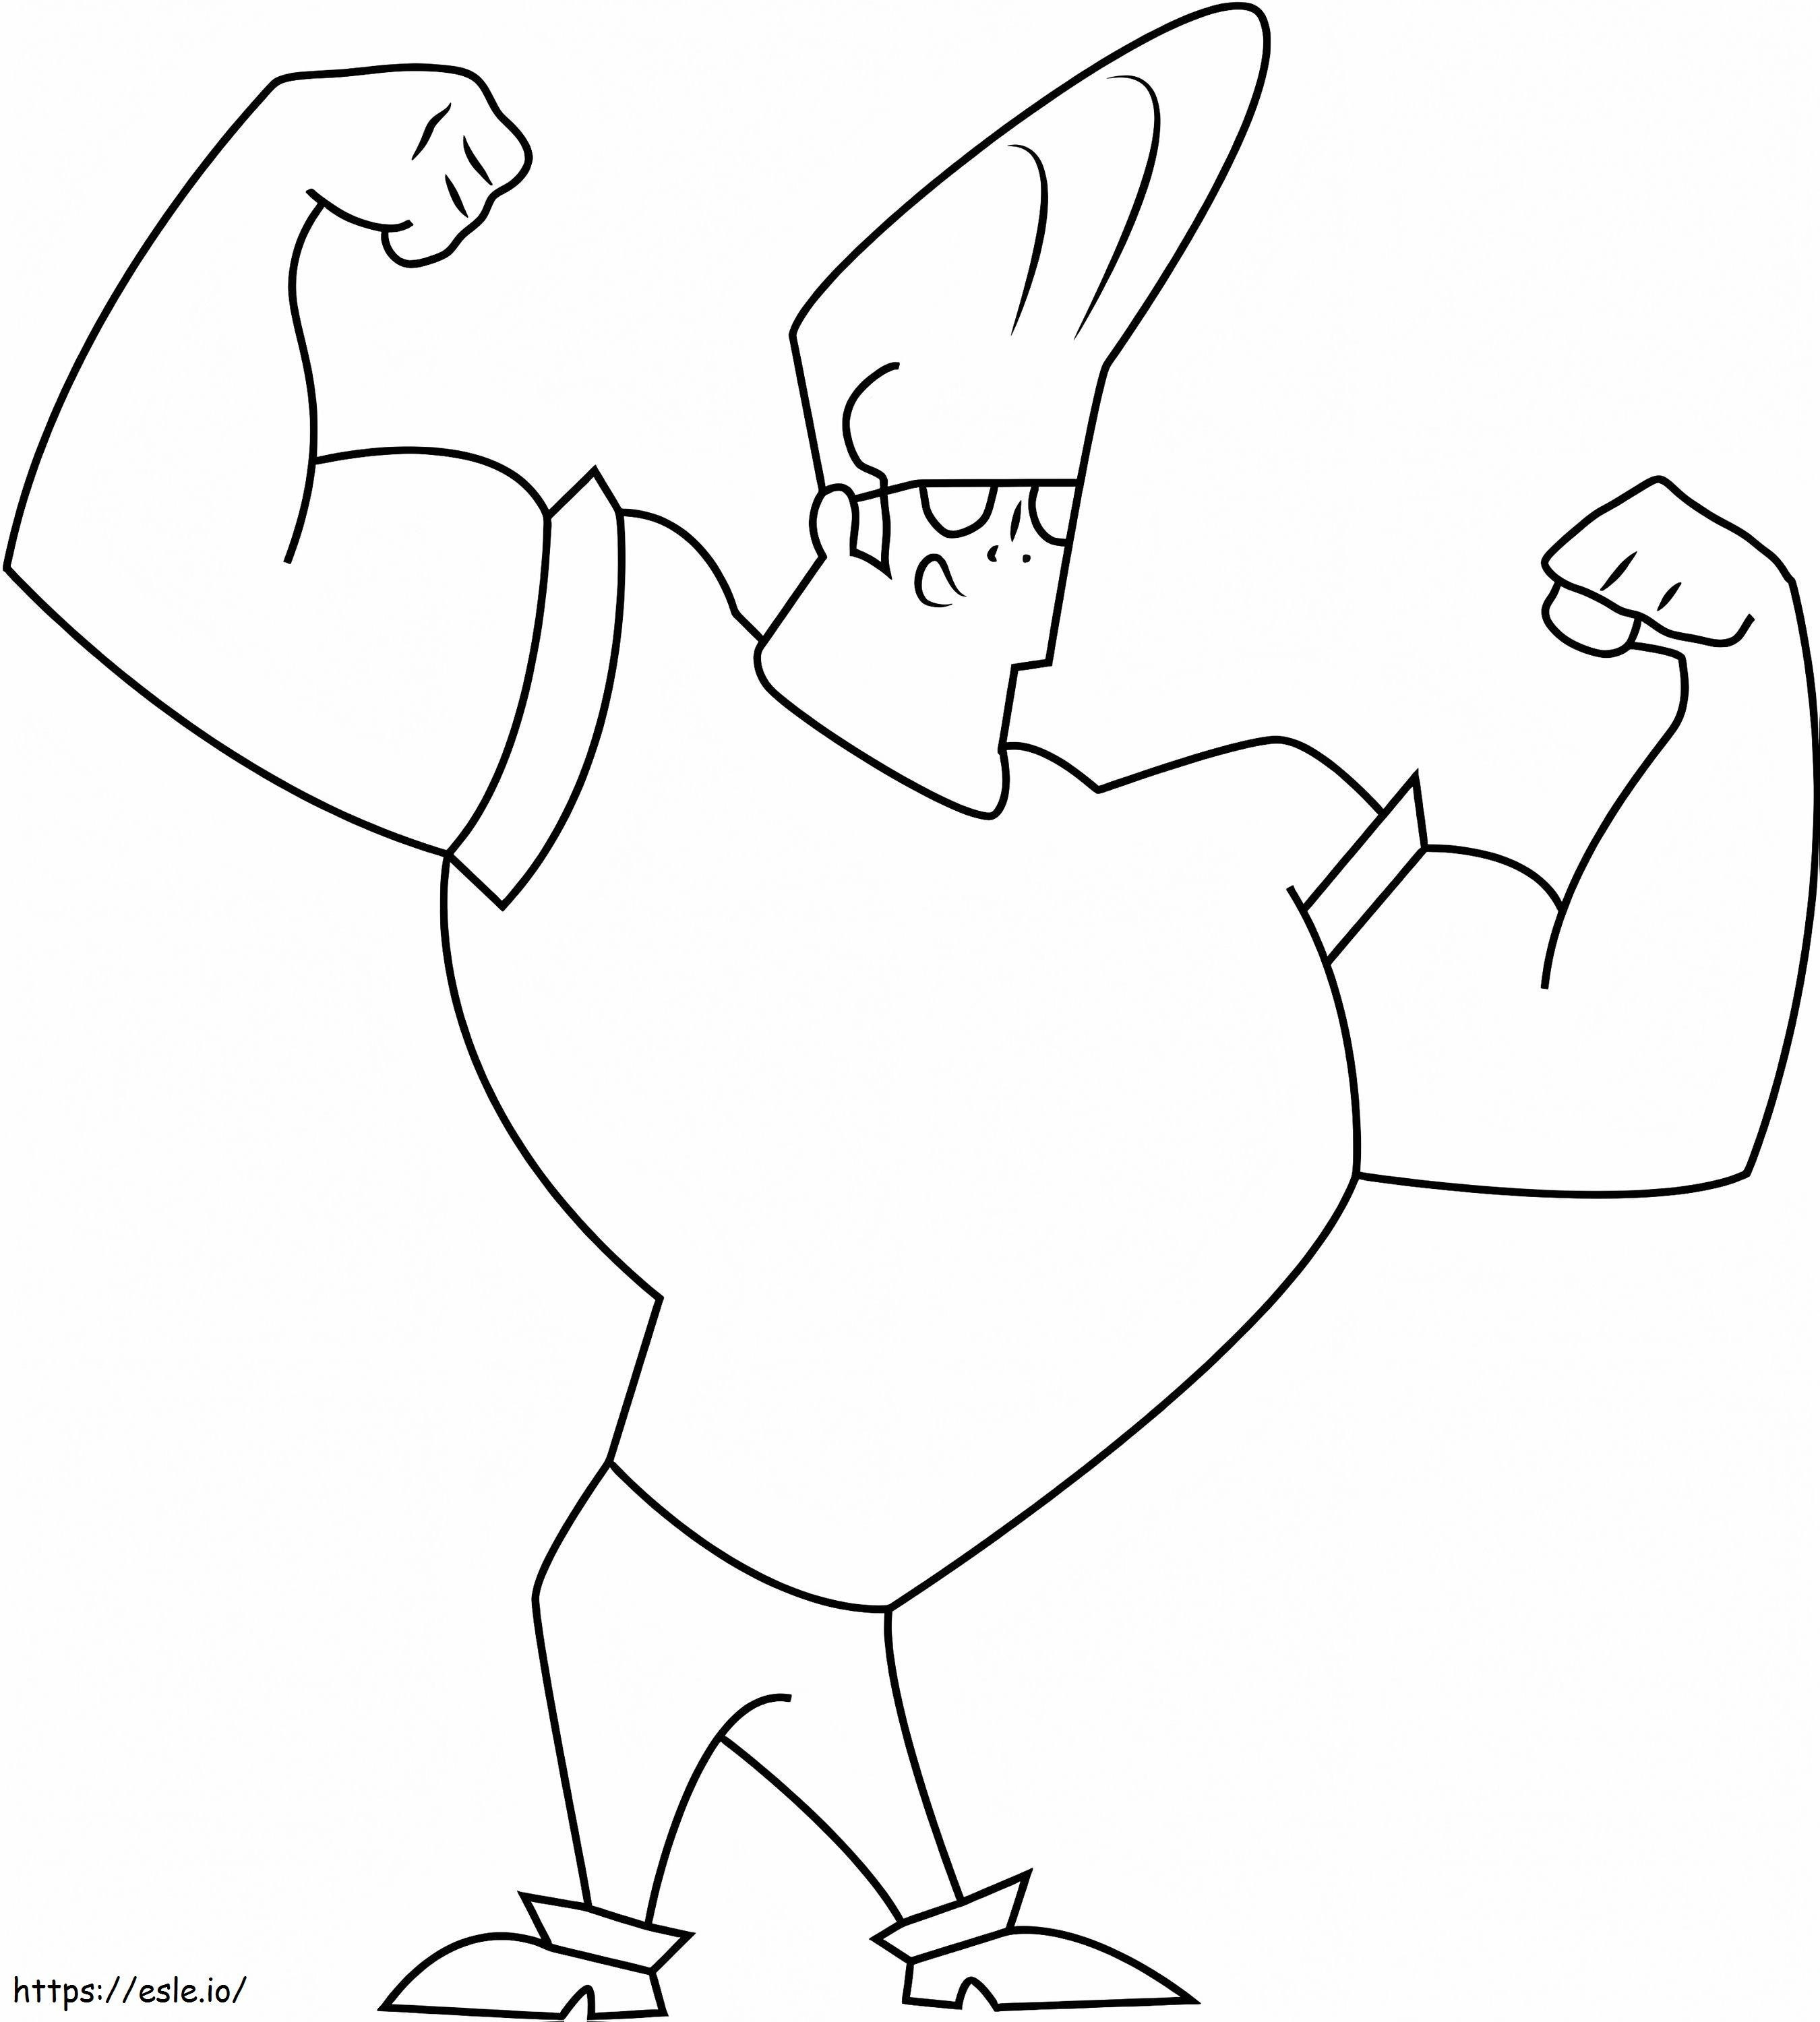 Strong Johnny Bravo coloring page